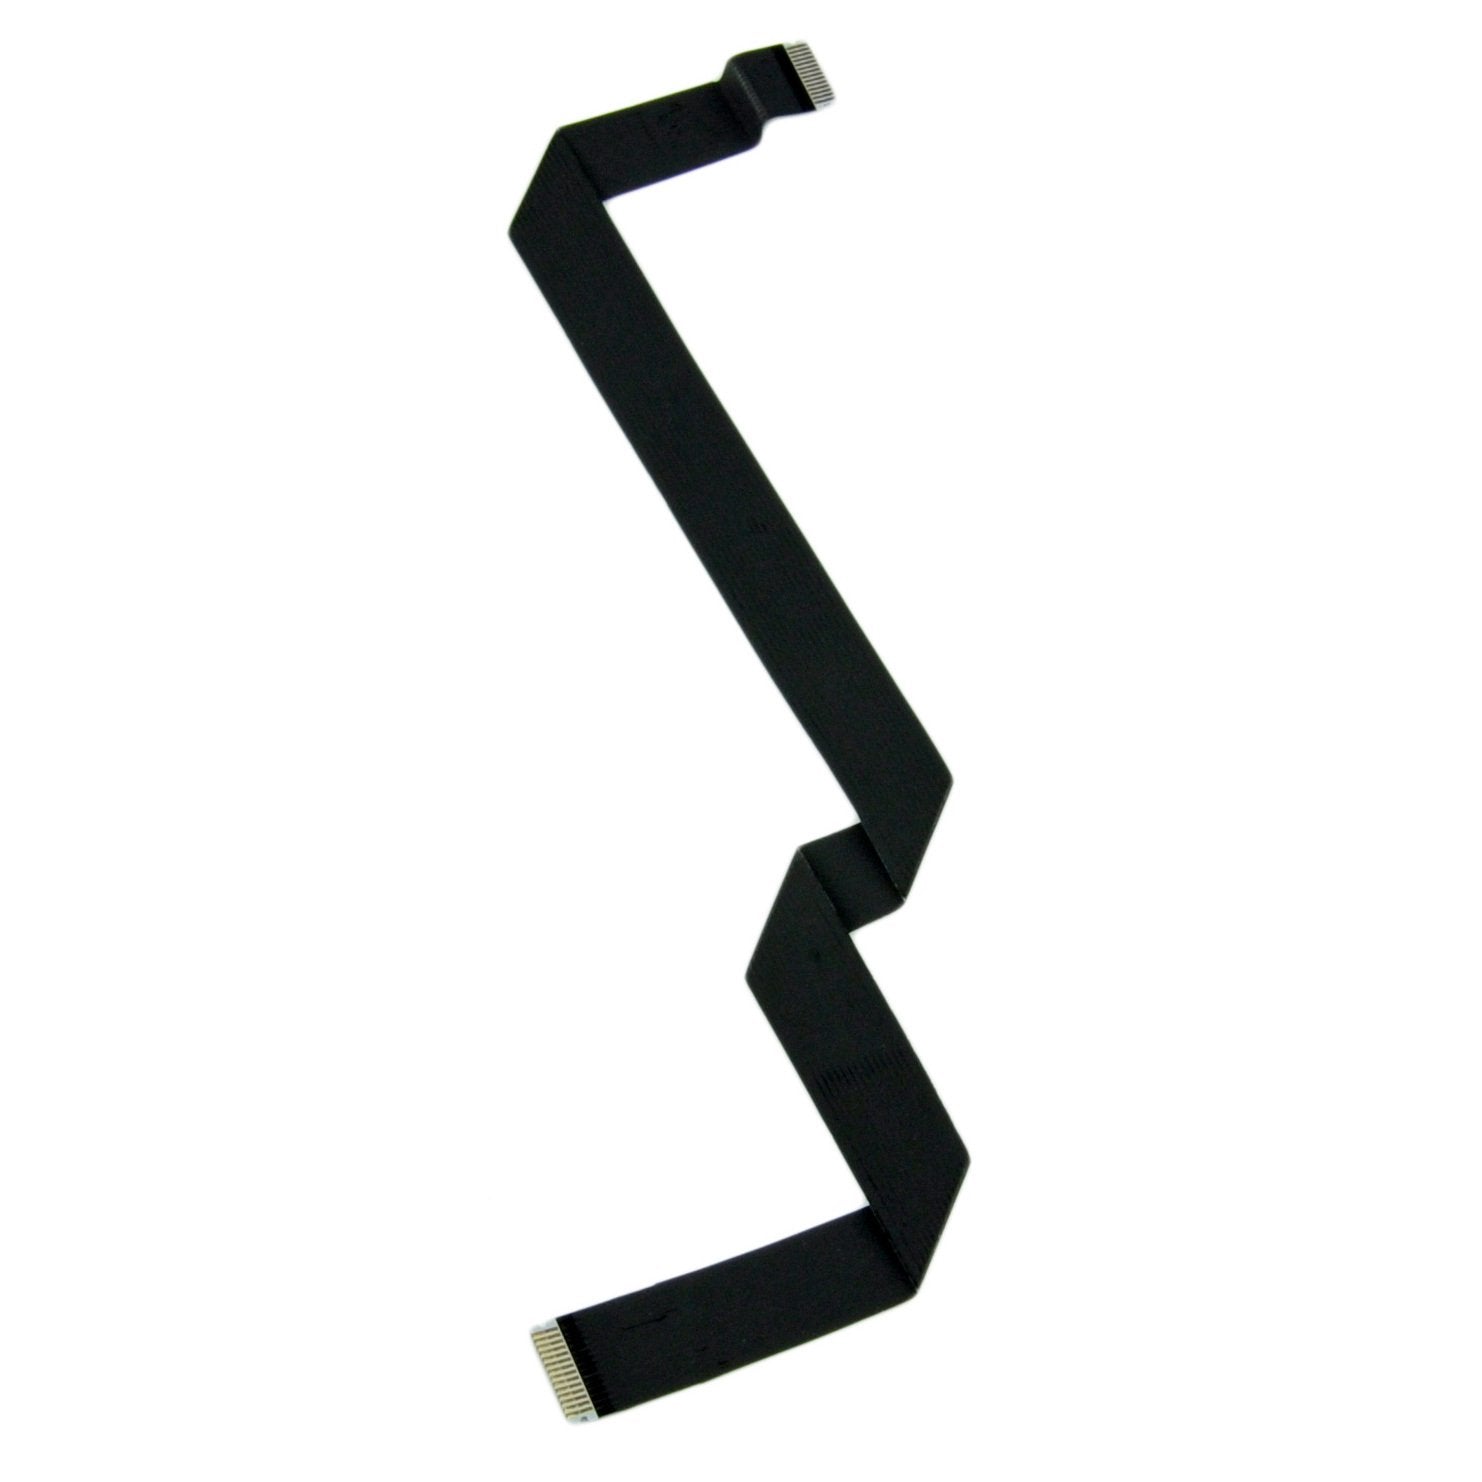 MacBook Air 11" (Mid 2011-Mid 2012) Trackpad Cable